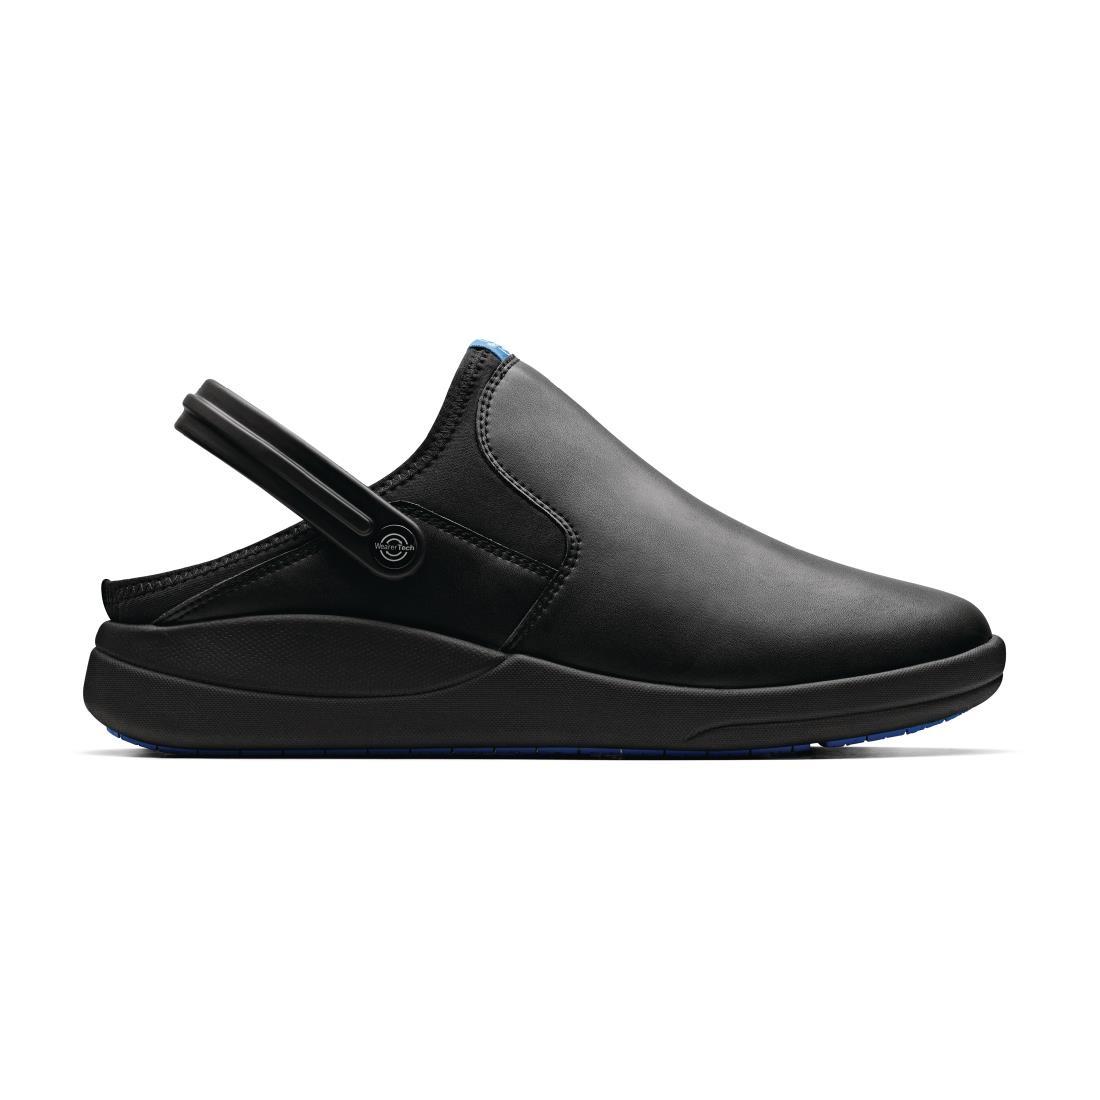 WearerTech Refresh Clog Black with Firm Insoles Size 37 - BB556-4  - 3